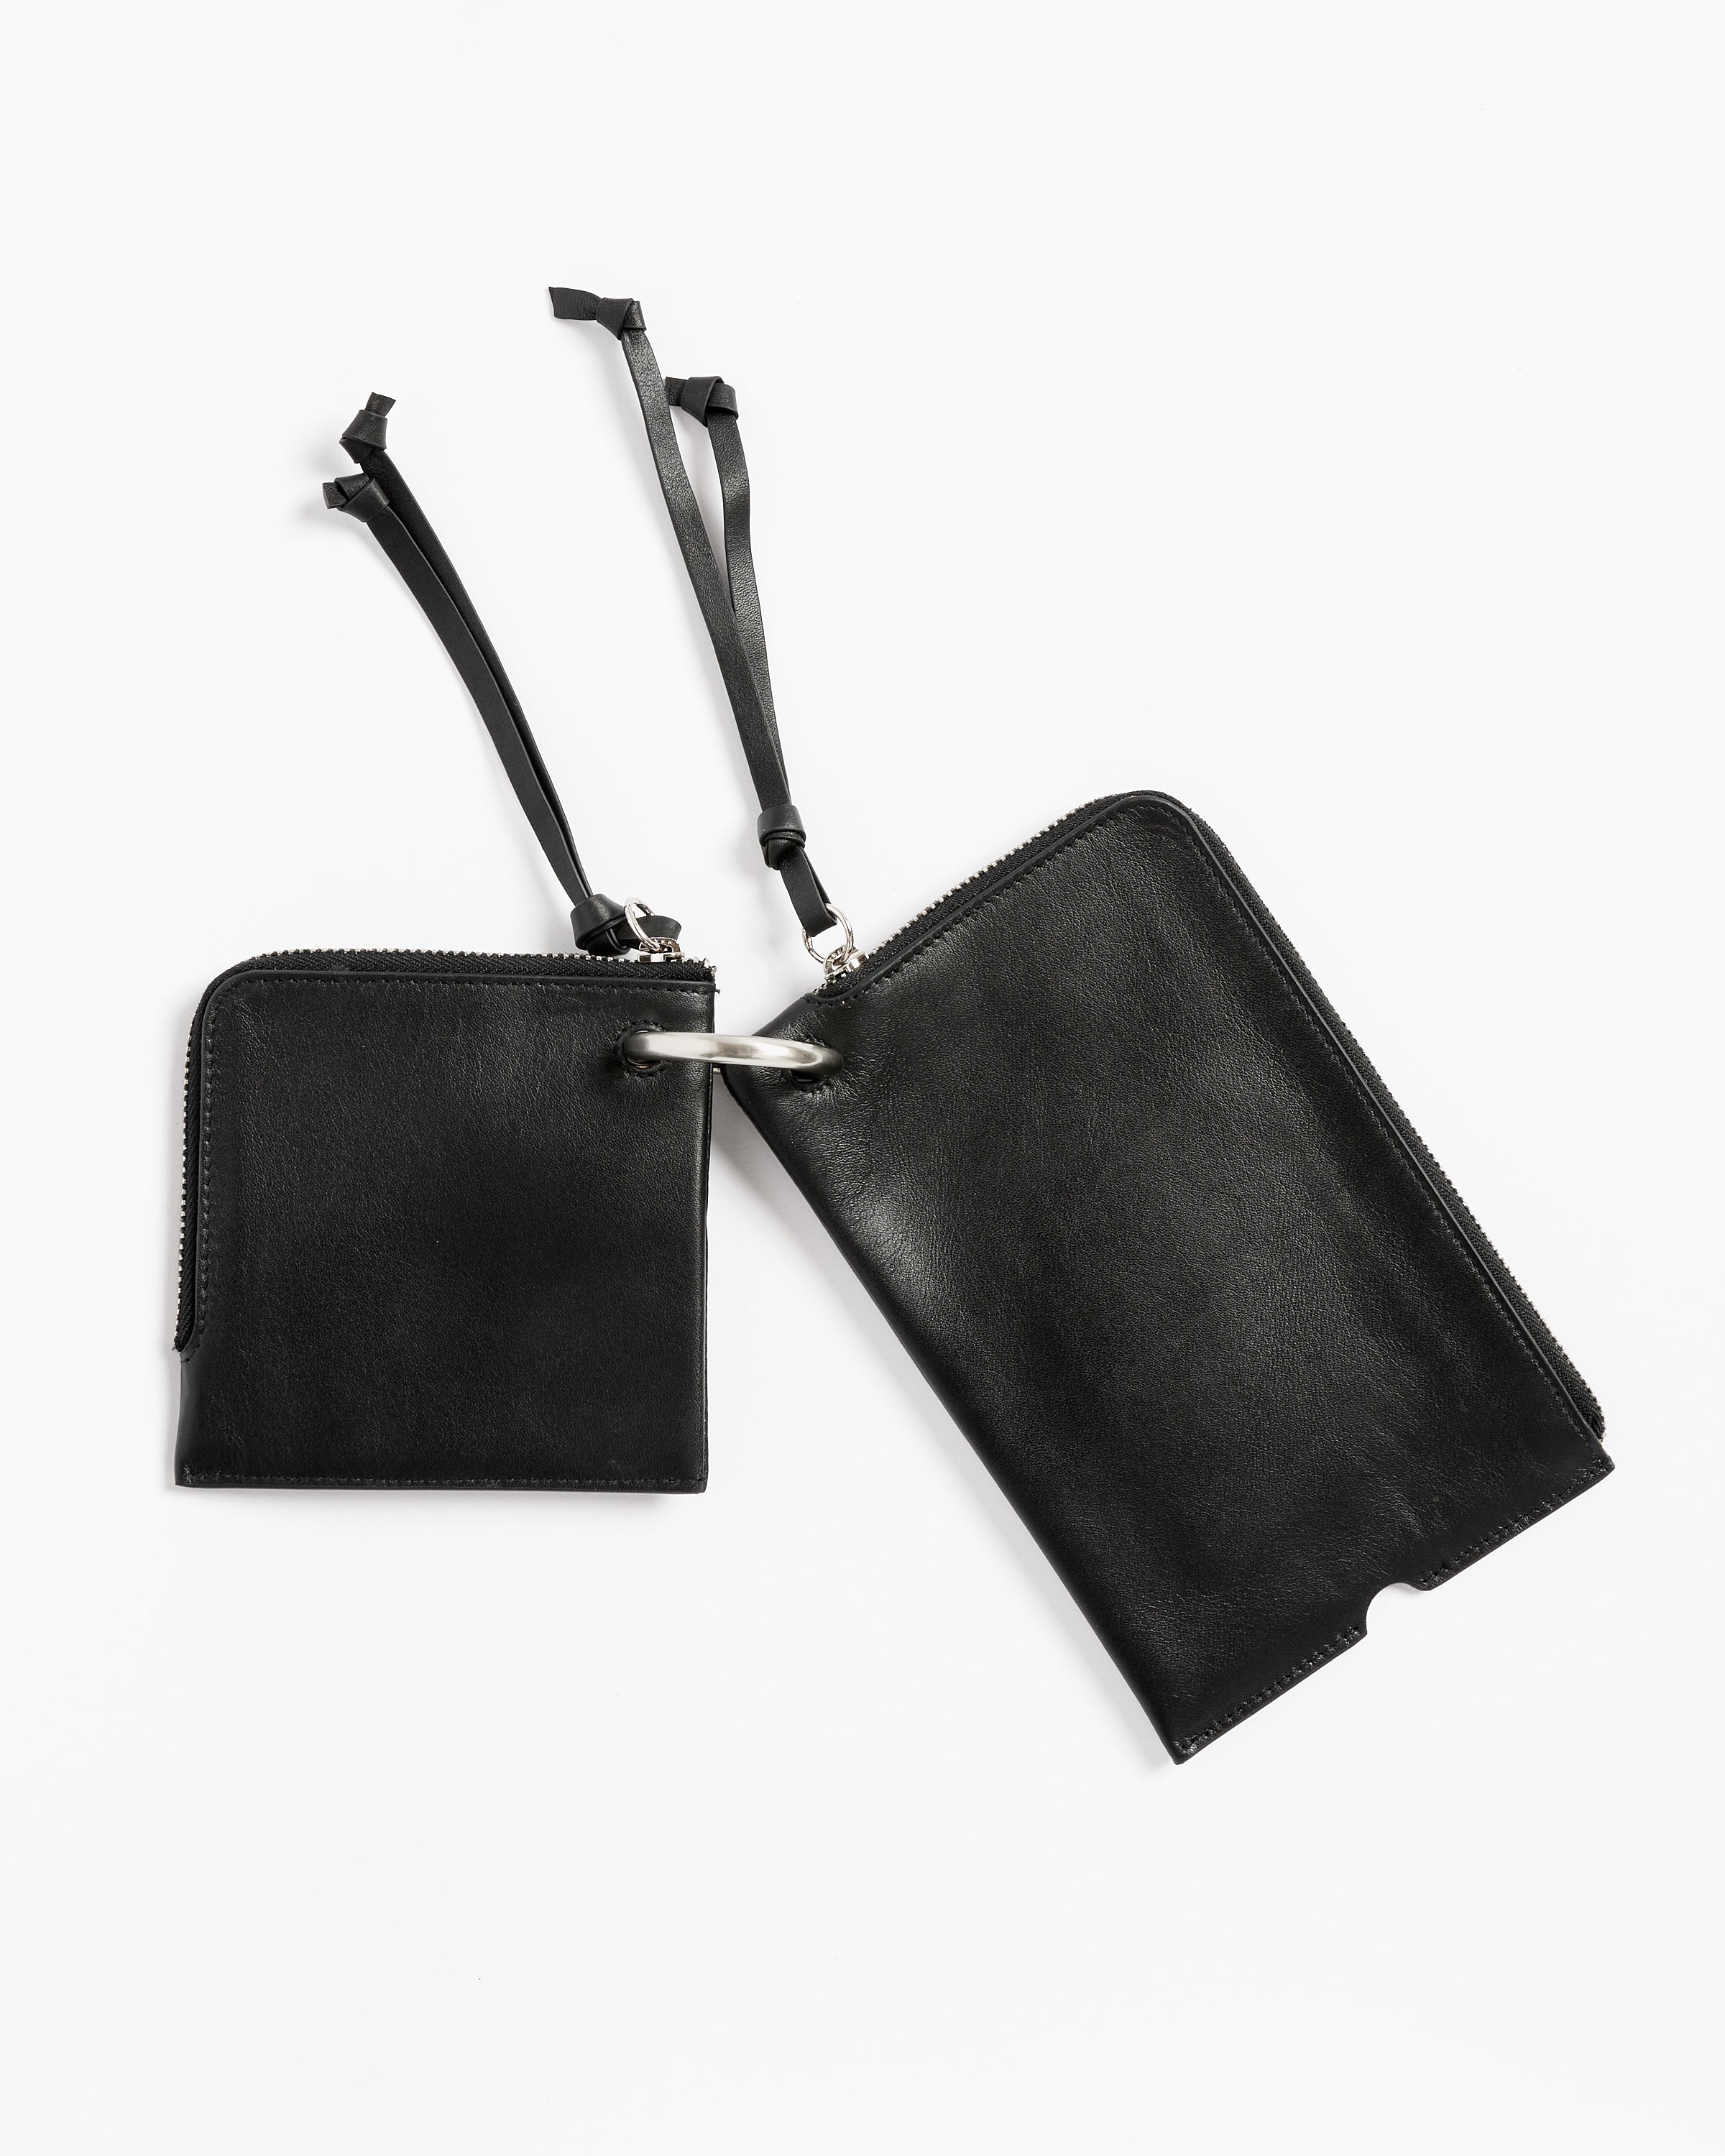 Leather Cord Card Holder in Black